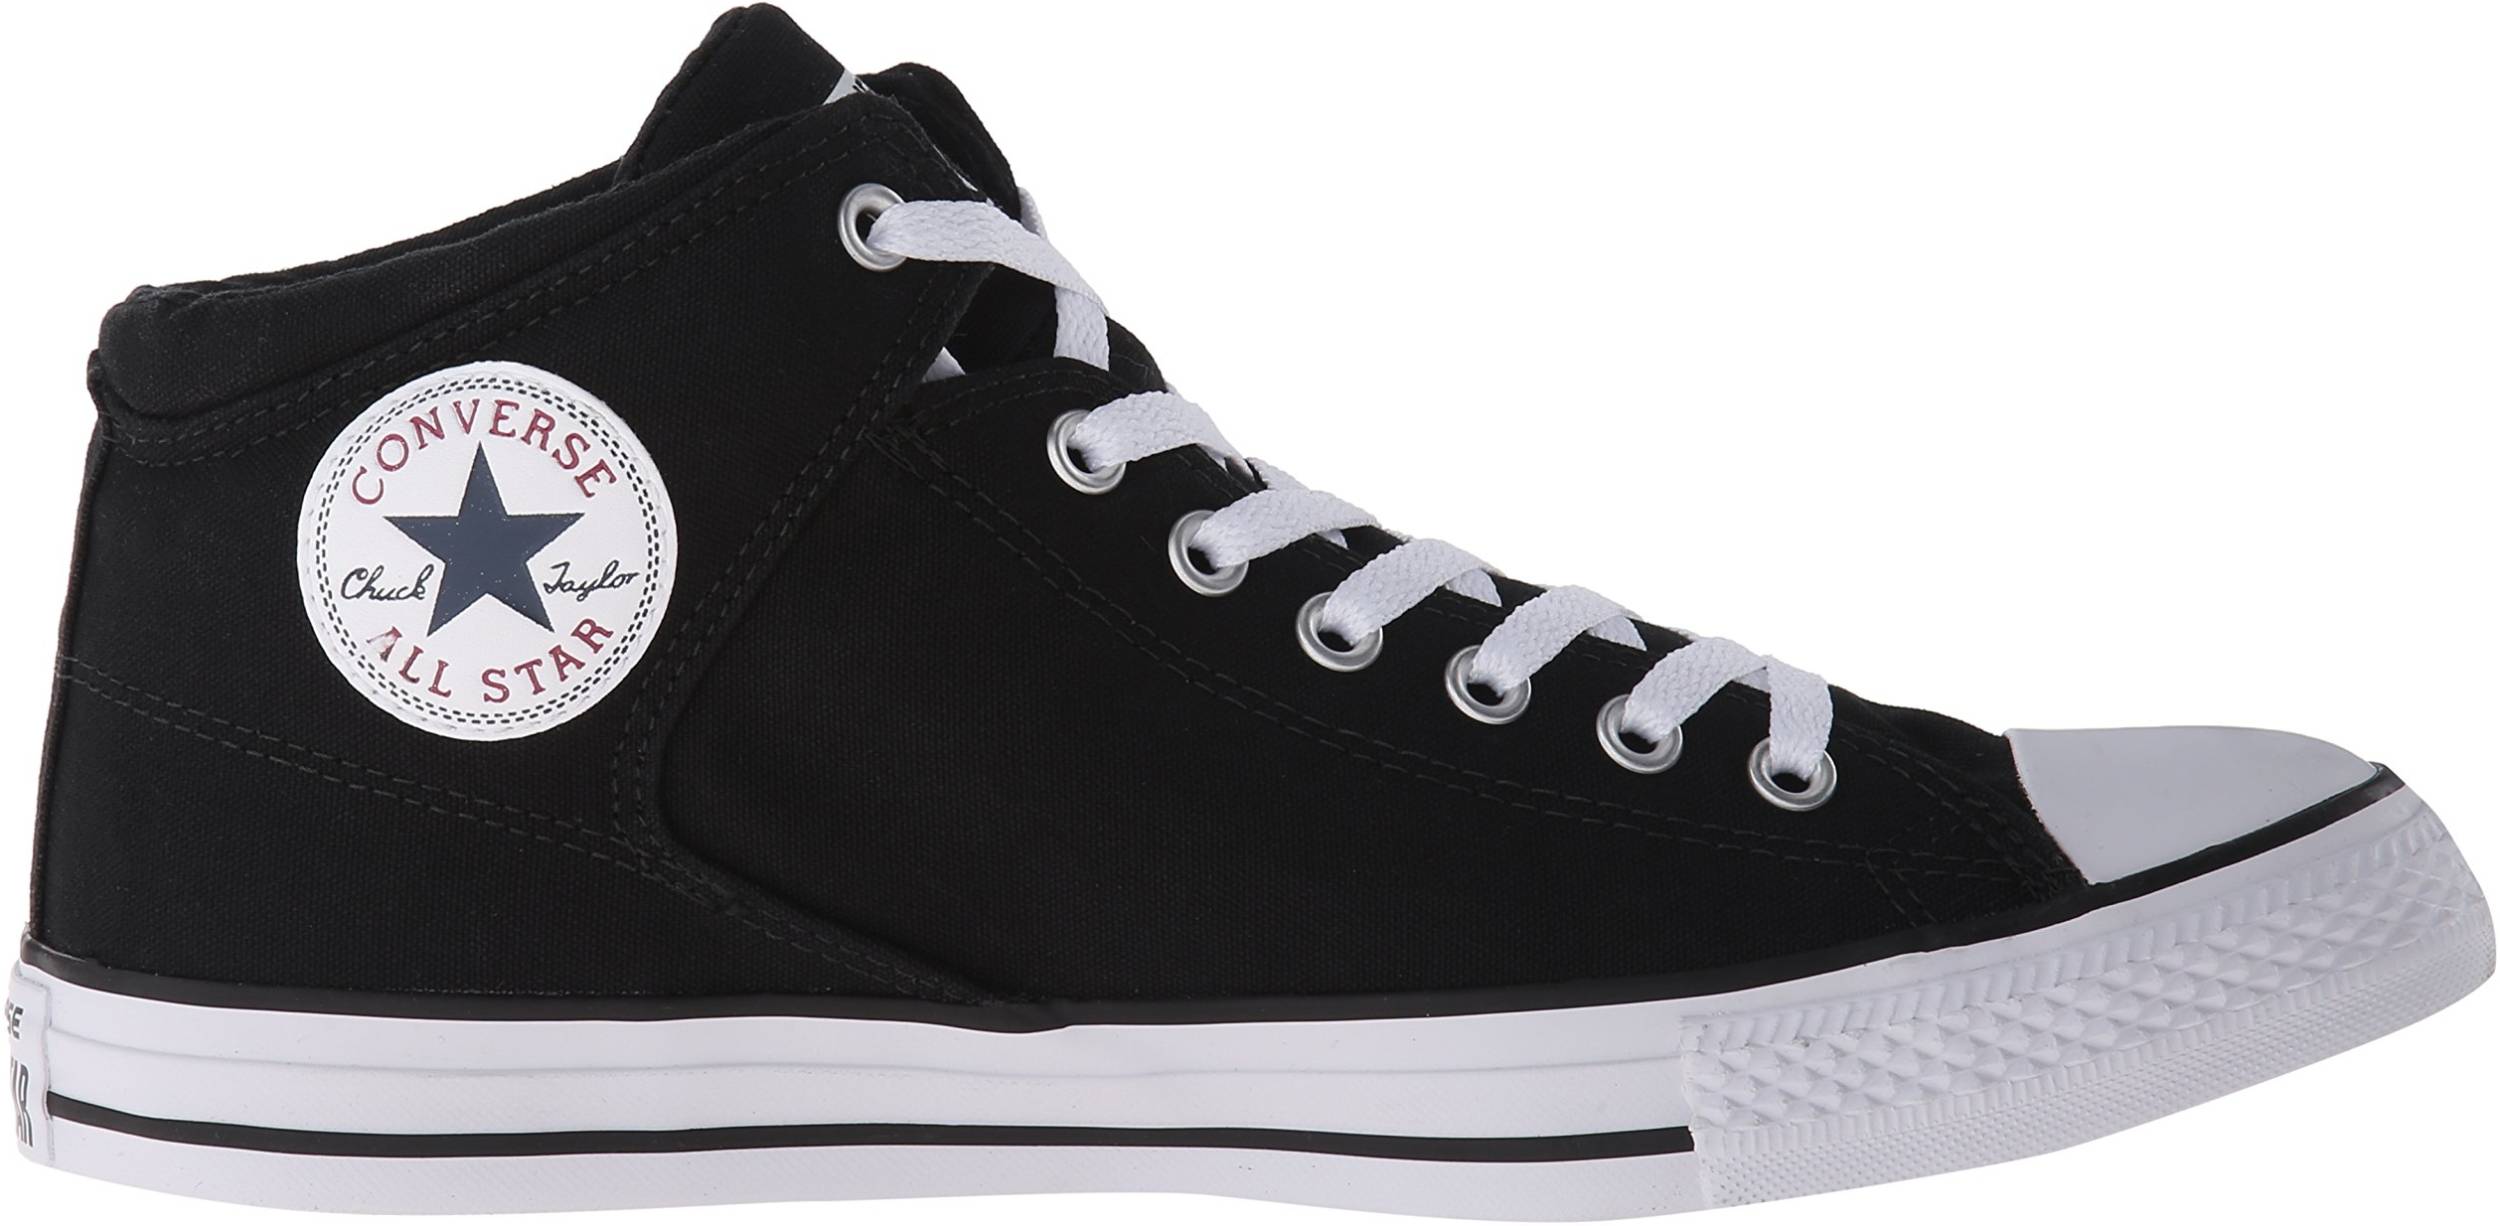 moeder kust Invloed Converse Chuck Taylor All Star High Street High Top Review, Facts,  Comparison | RunRepeat